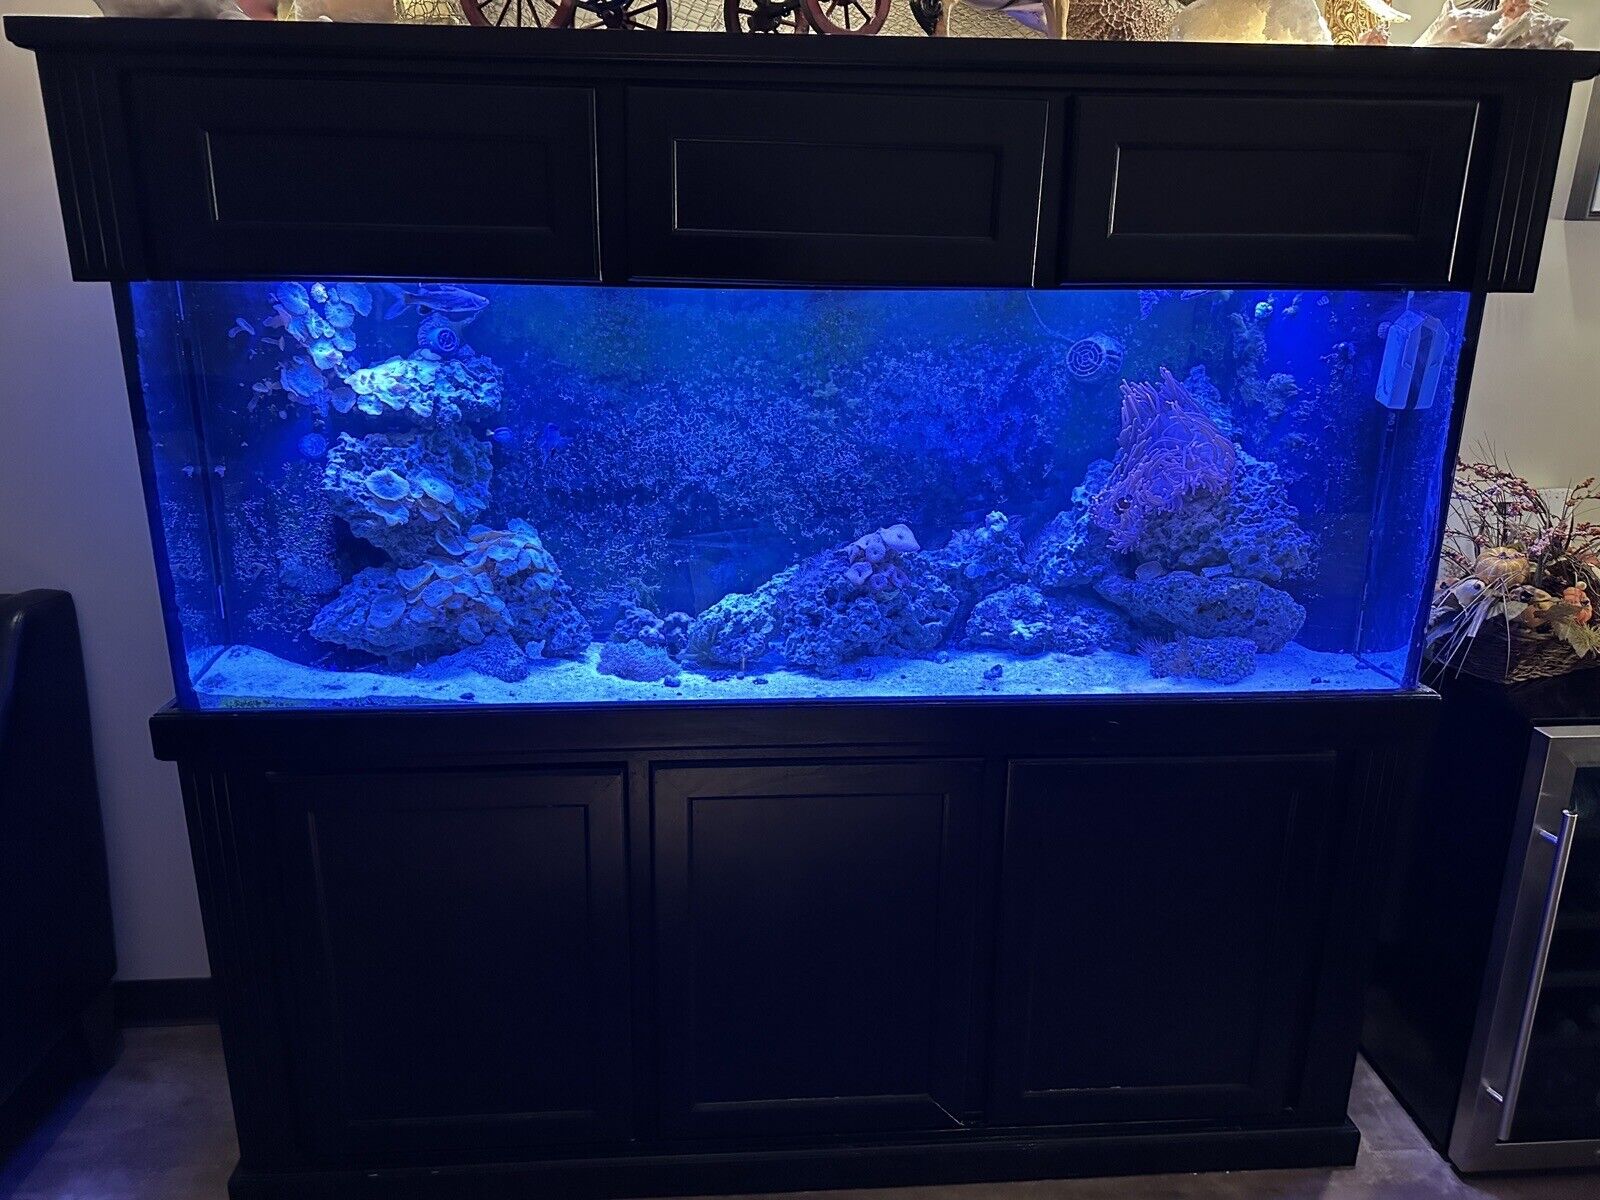 150 Gallon Salt Water Fish Tank Complete With Caninet, Lights, Pumps And Skimmer